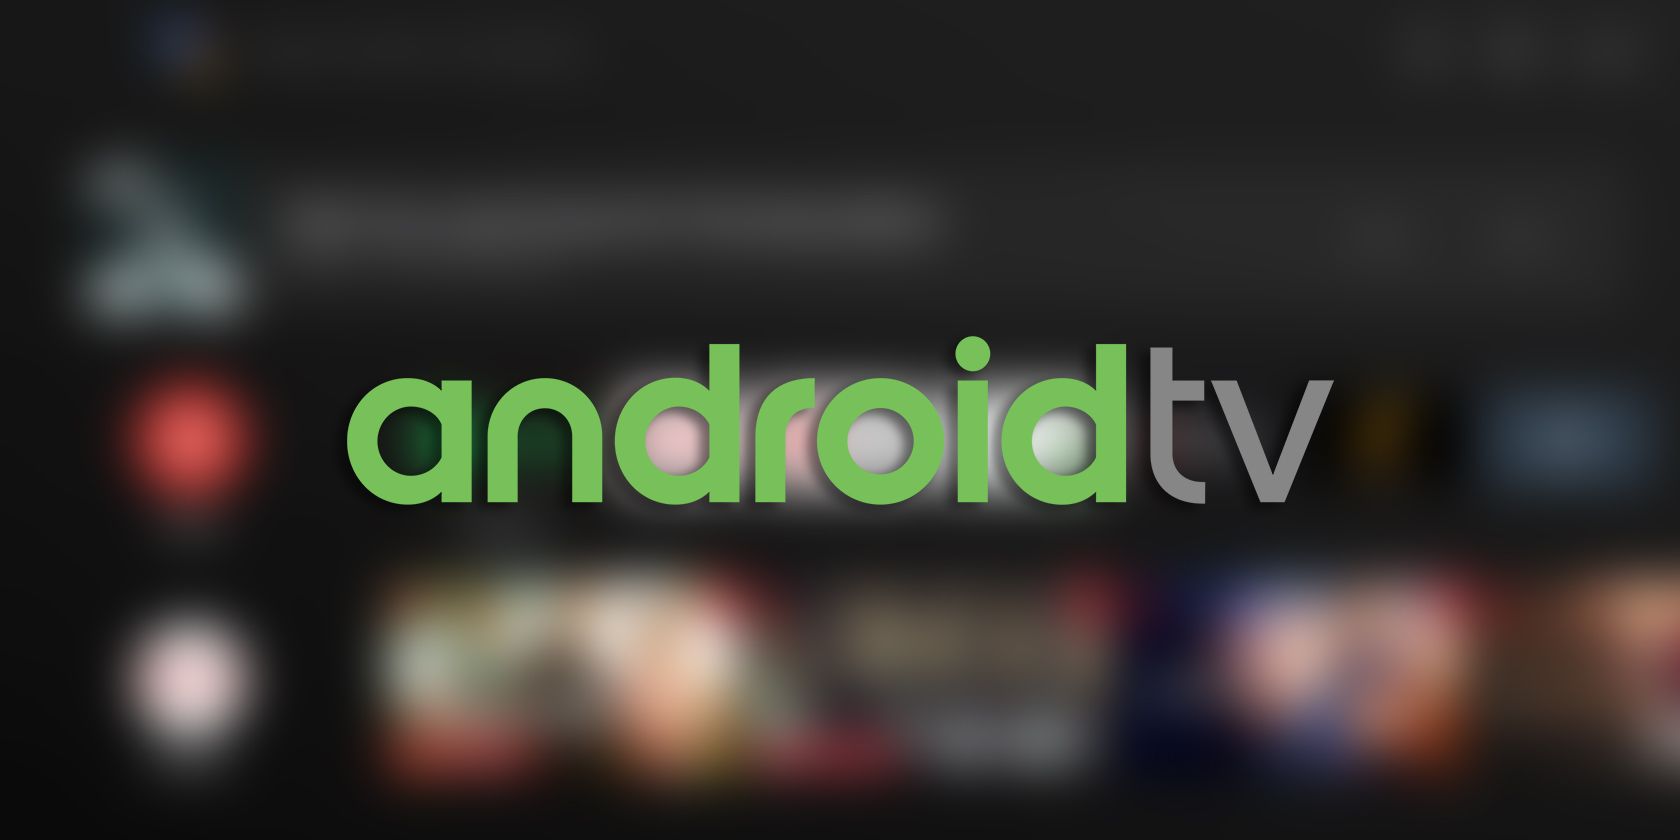 Android TV on a blurred background.